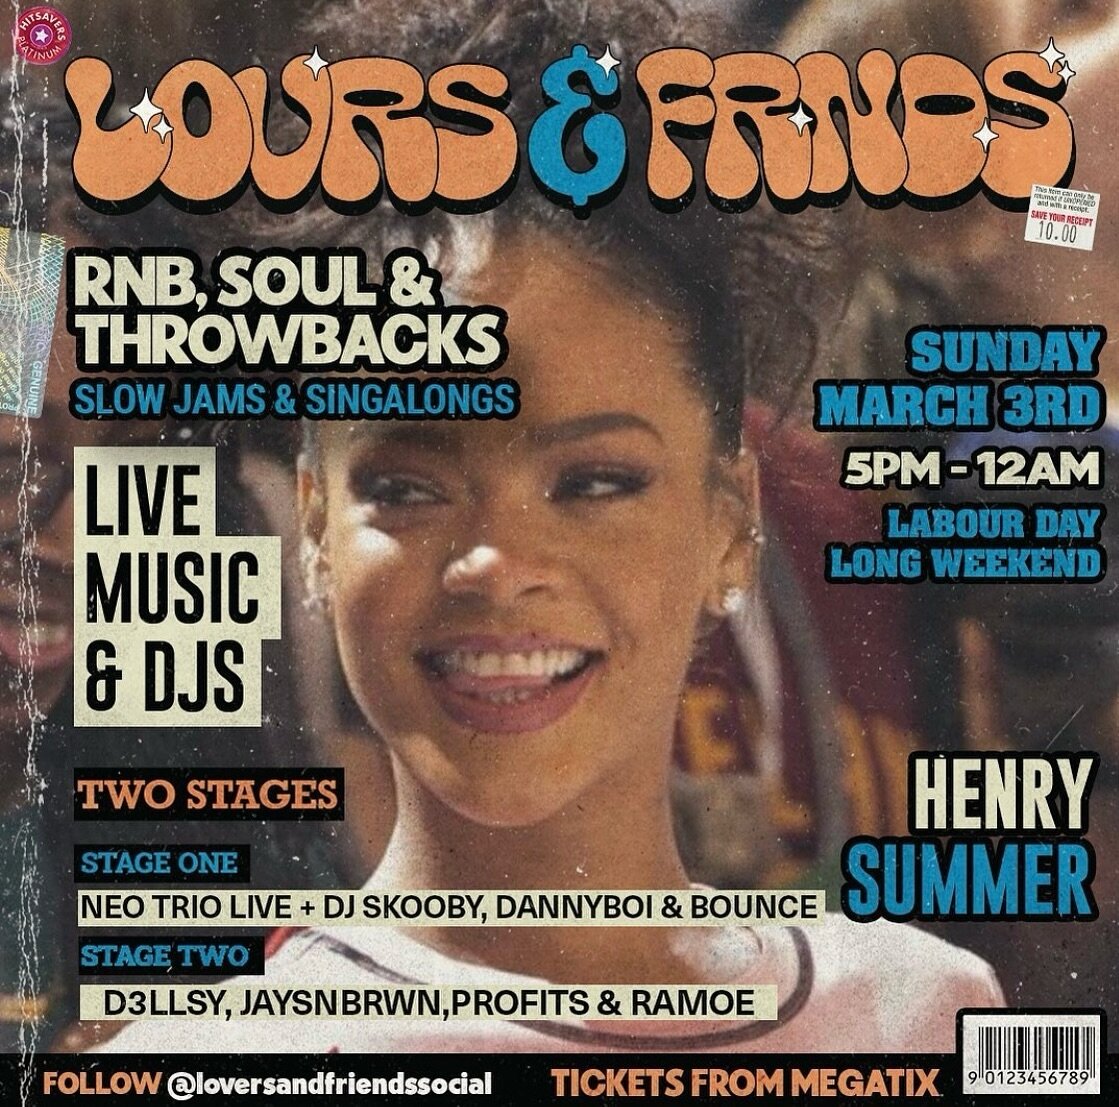 This Sunday come down to @henrysummerbar for the Second Edition of @loversandfriendssocial with DJ Bounce rocking the Live stage alongside @hansfiance &amp; @neotheduo with DJs @skoobysnax23 &amp; @iamdjdannyboi 

Tickets through @megatix.australia g